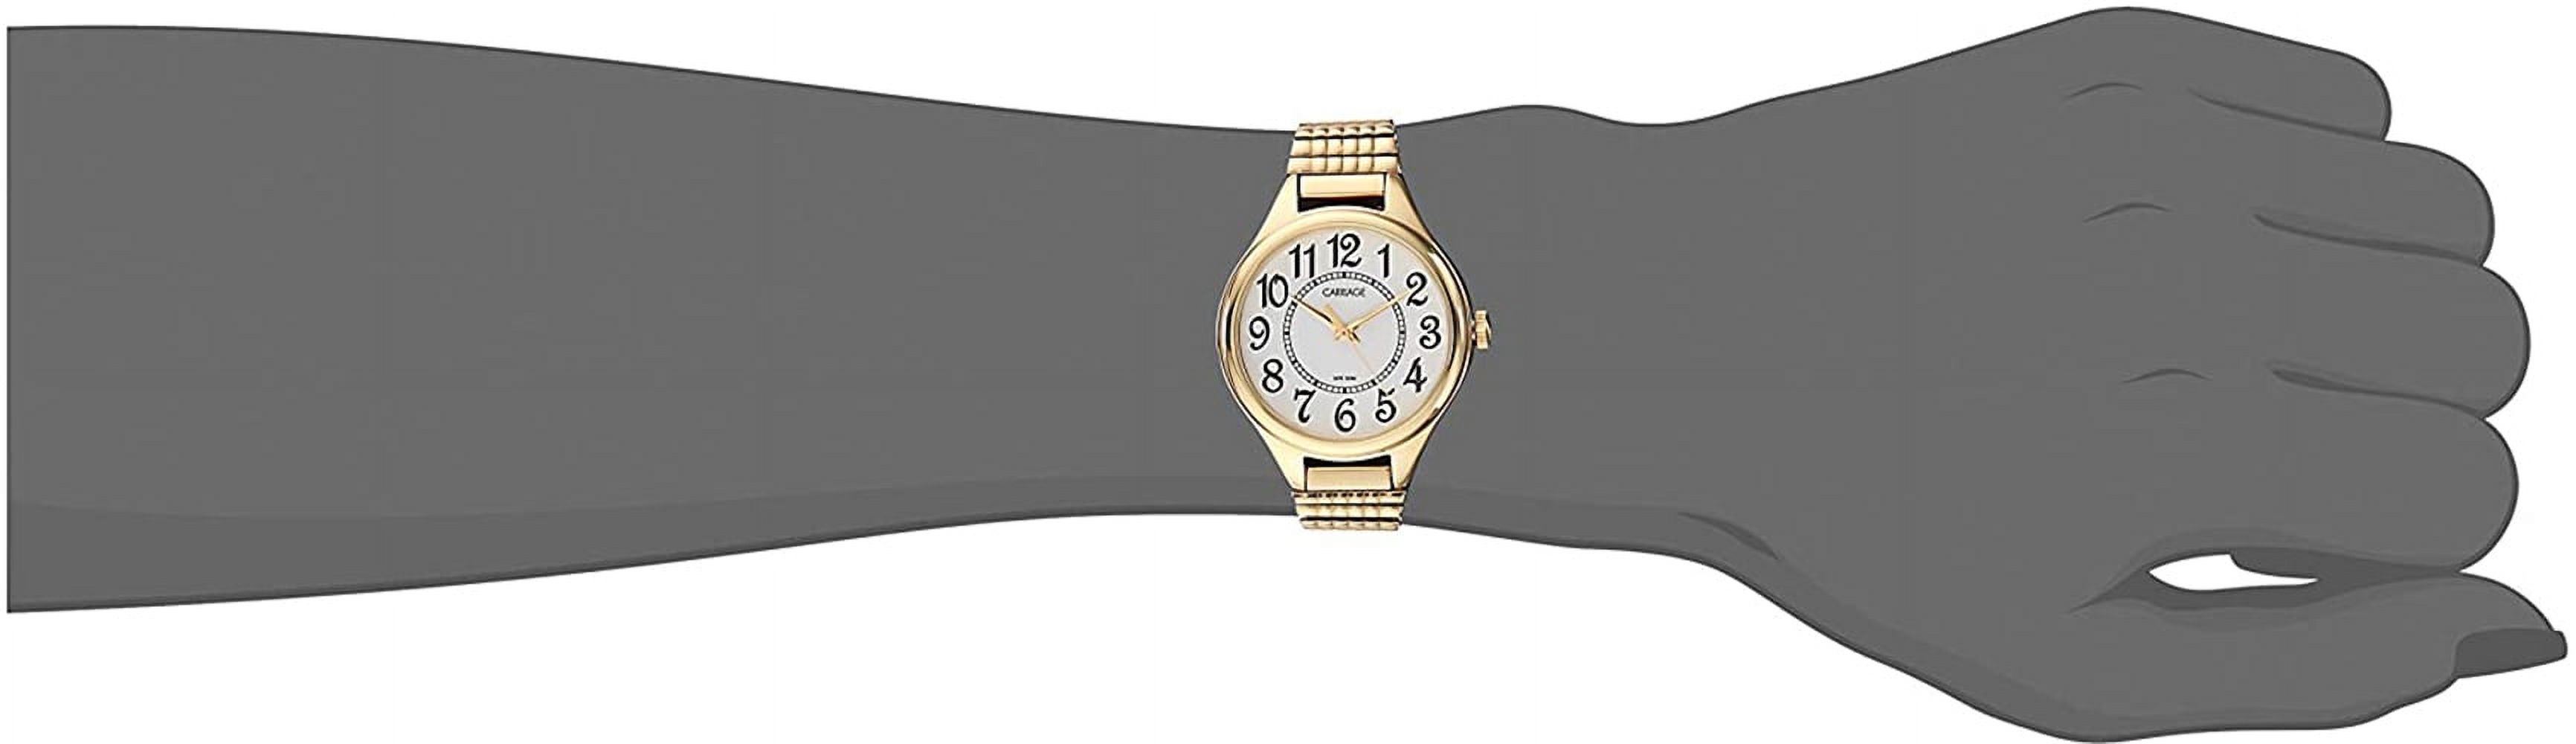 Carriage Women's Carolyn Watch, Gold-Tone Stainless Steel Expansion Band - image 3 of 3